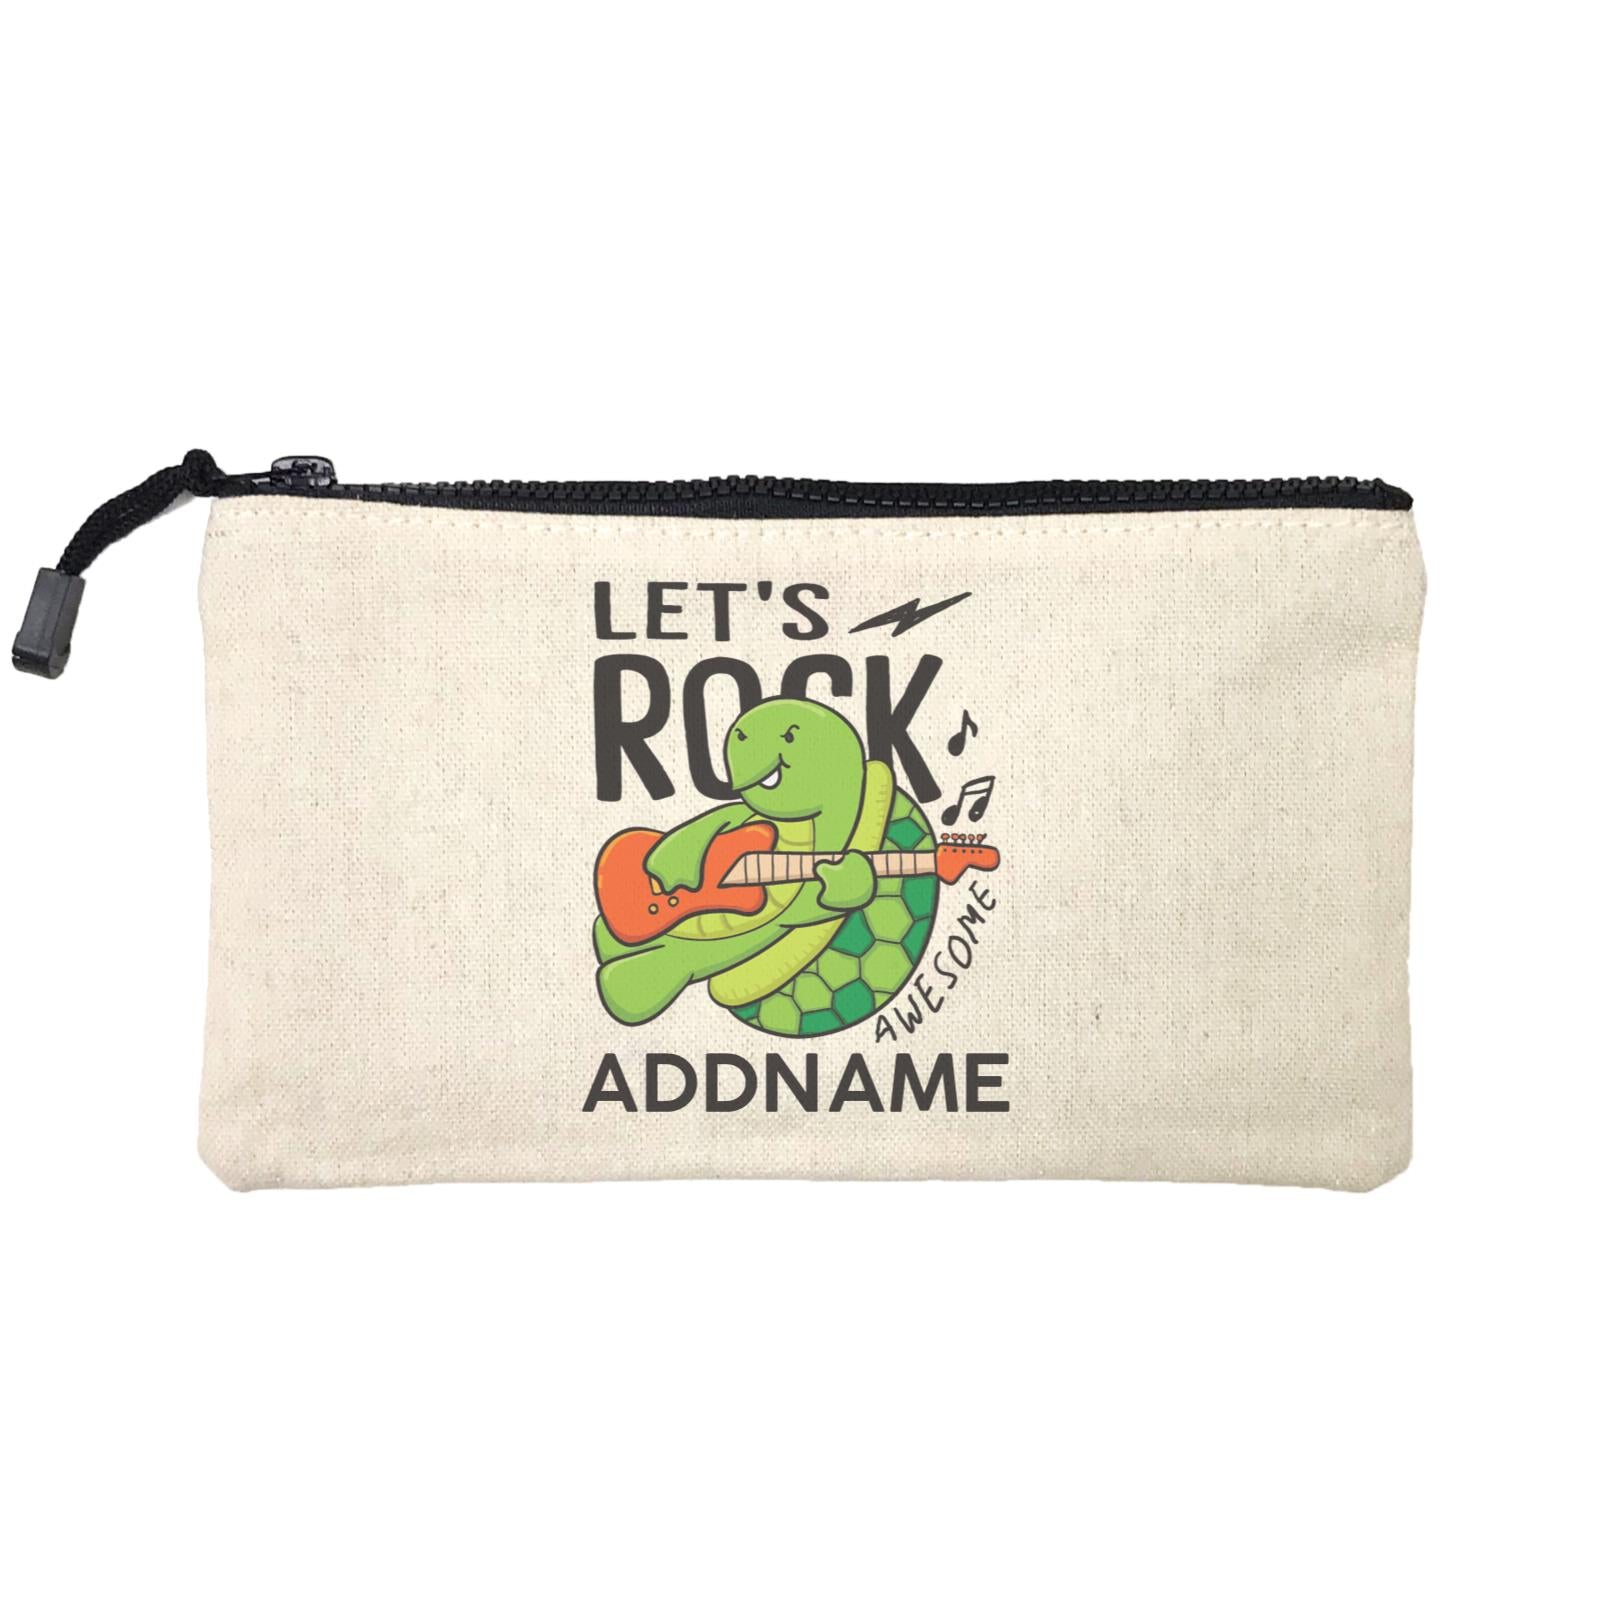 Cool Cute Animals Turtle Let's Rock Awesome Addname Mini Accessories Stationery Pouch